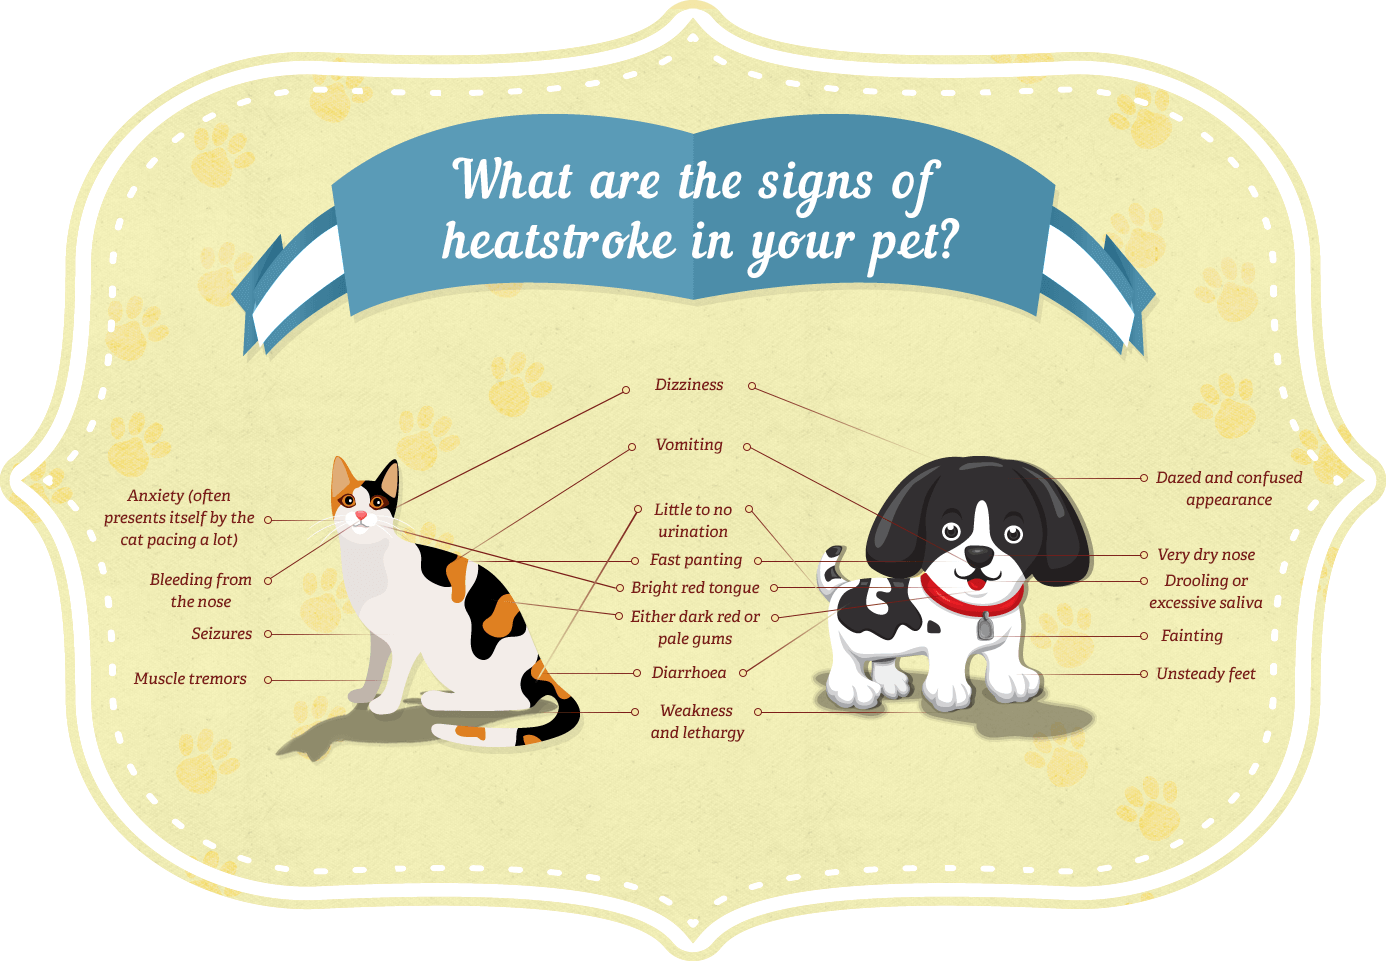 What are the signs of heatstroke in your pet?